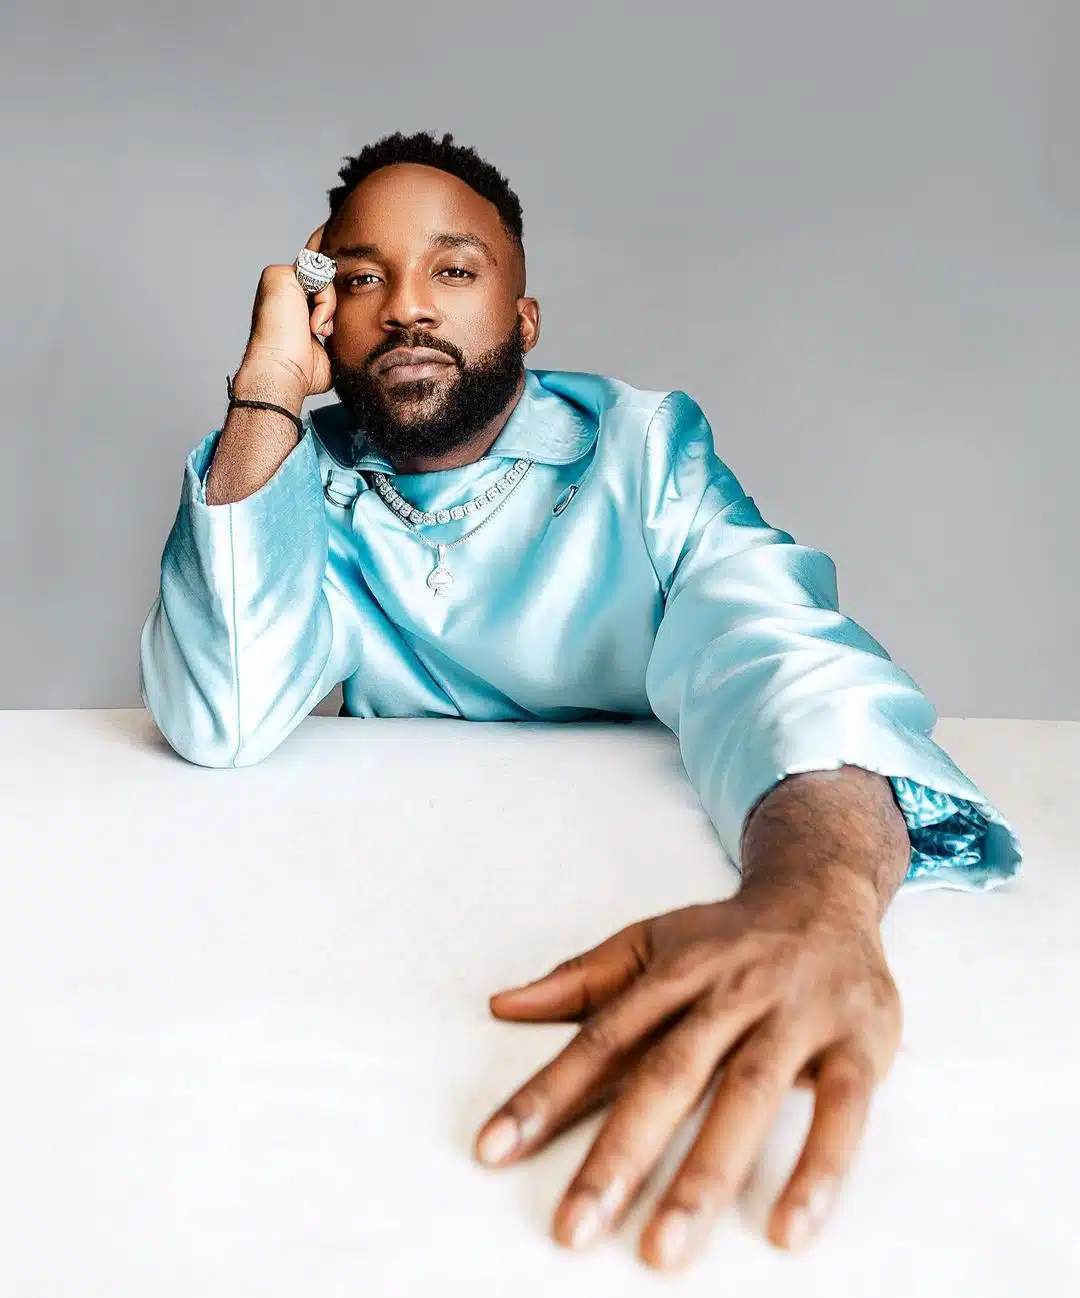 “Pray for my current relationship so I can settle down” – Iyanya appeals to fans